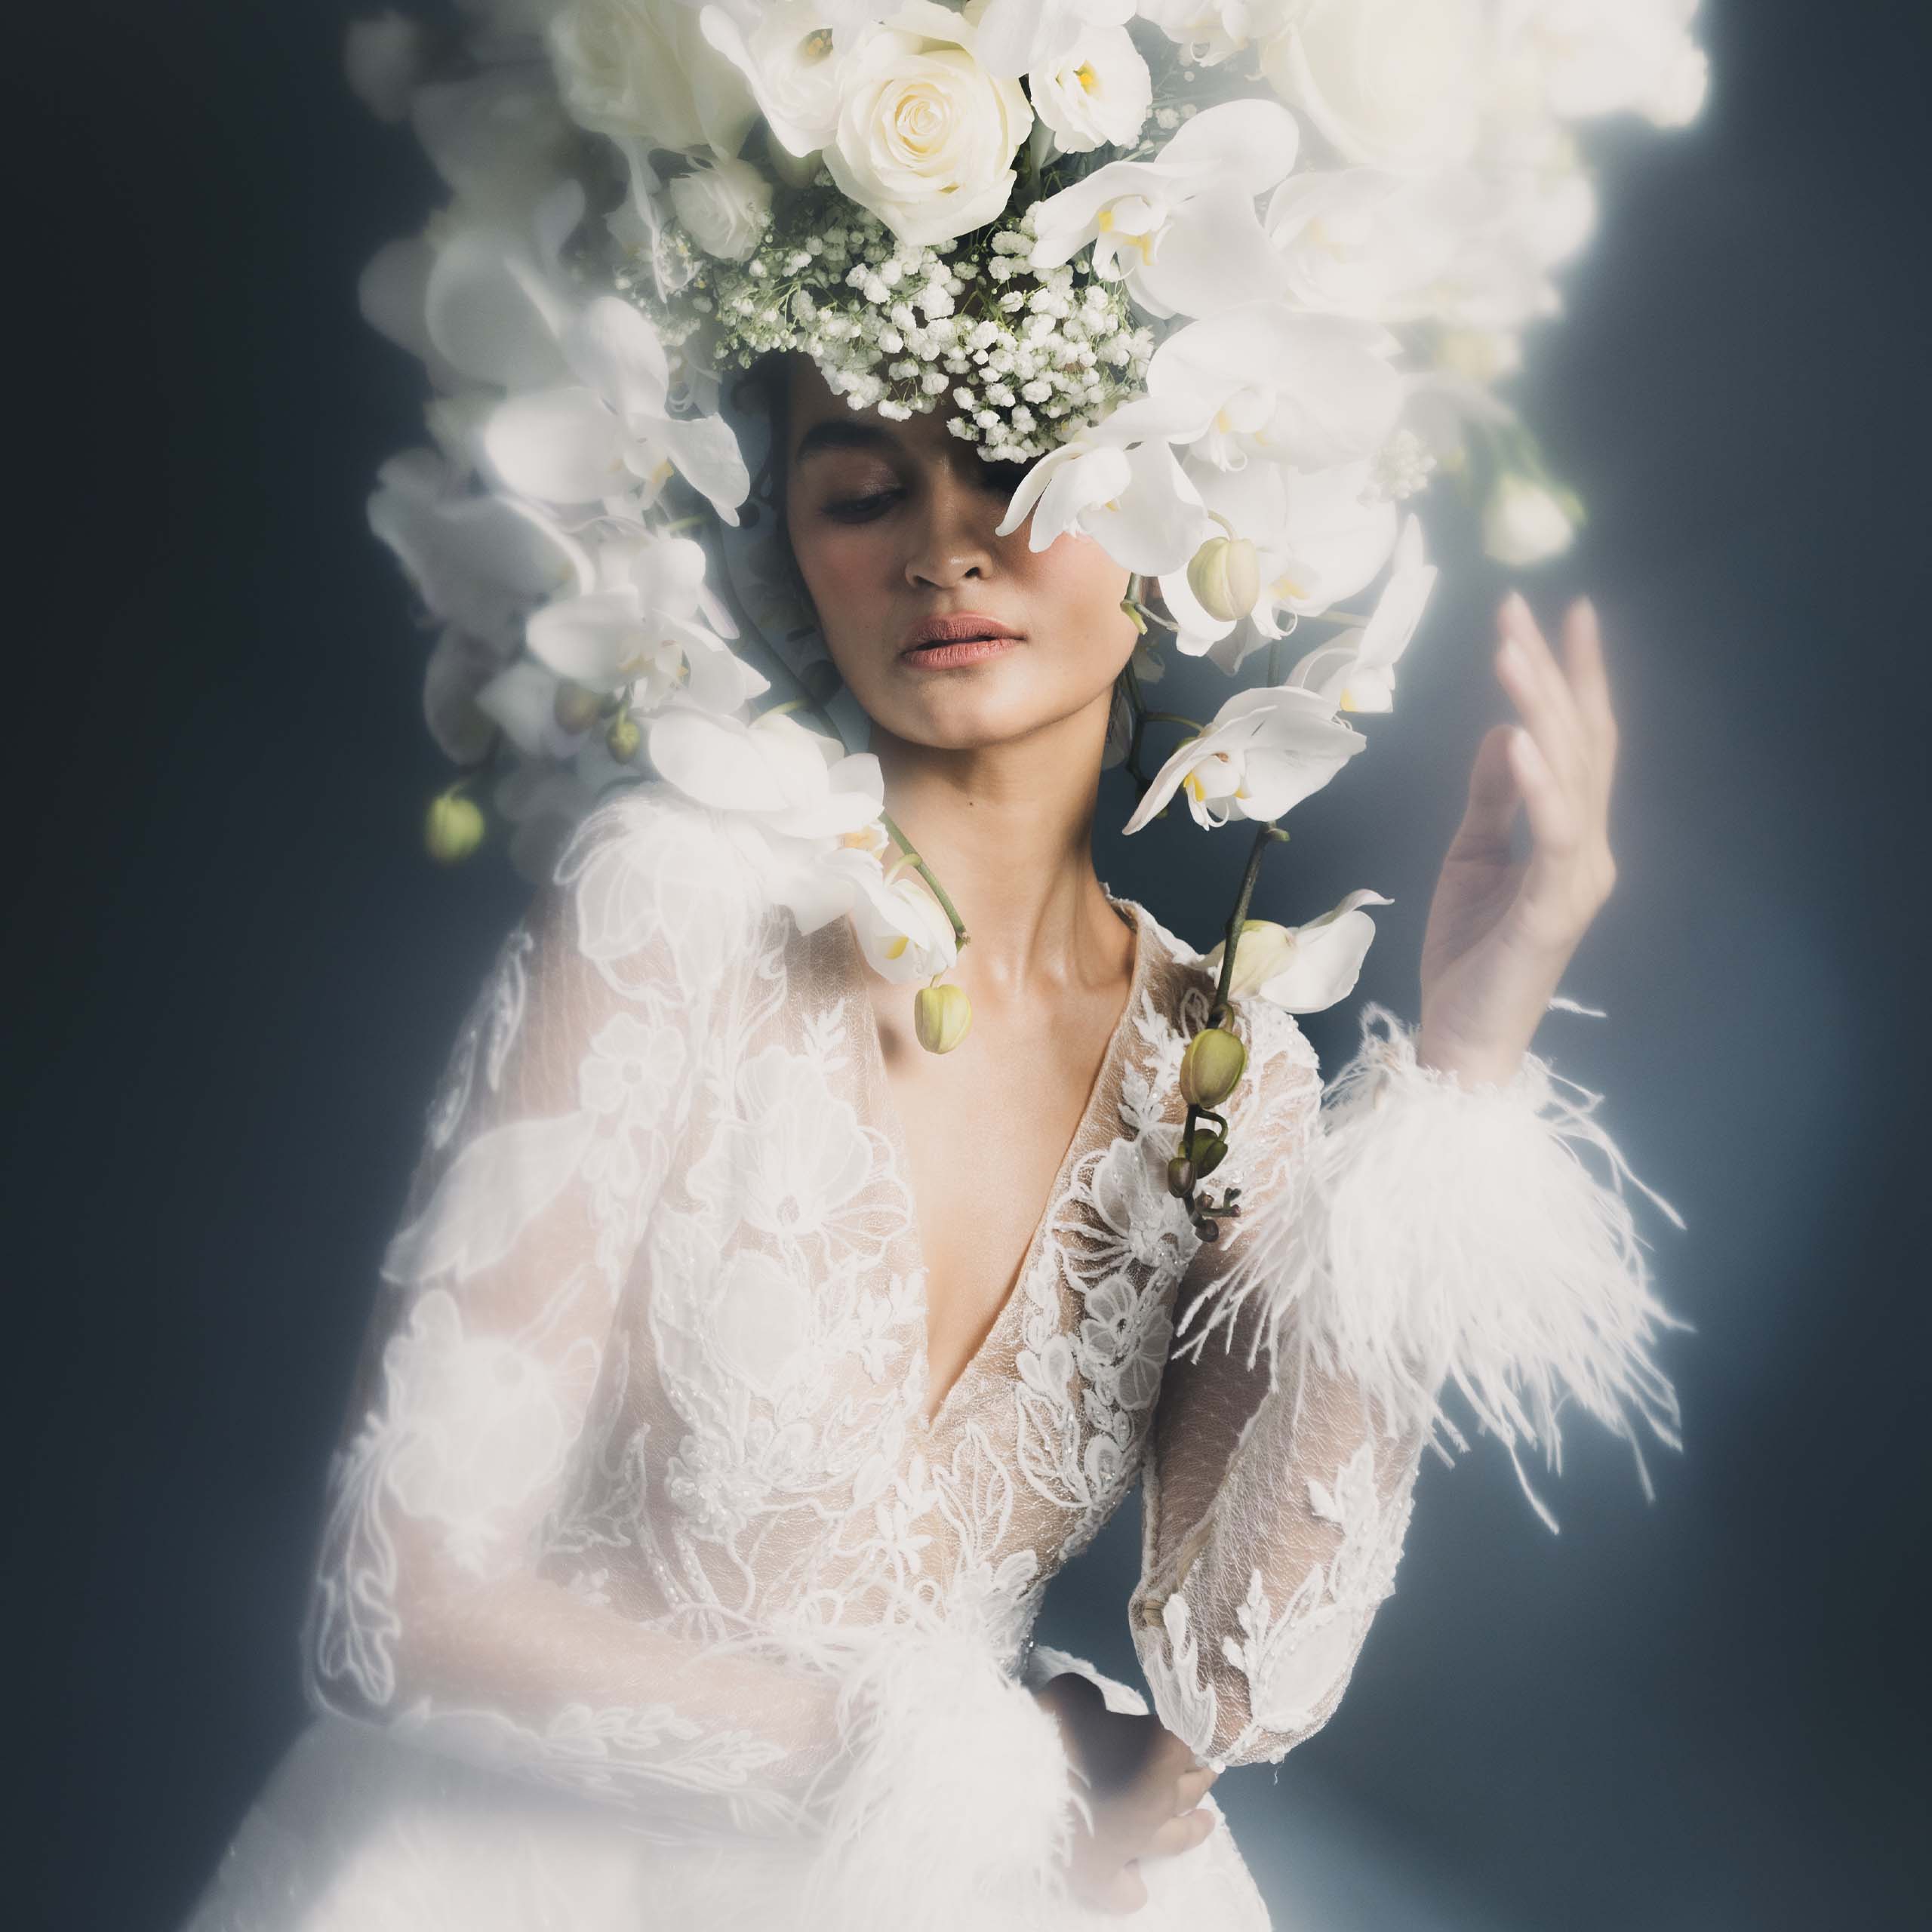 Michael Leyva’s New Bridal Collection is Inspired by an Enchanted Garden